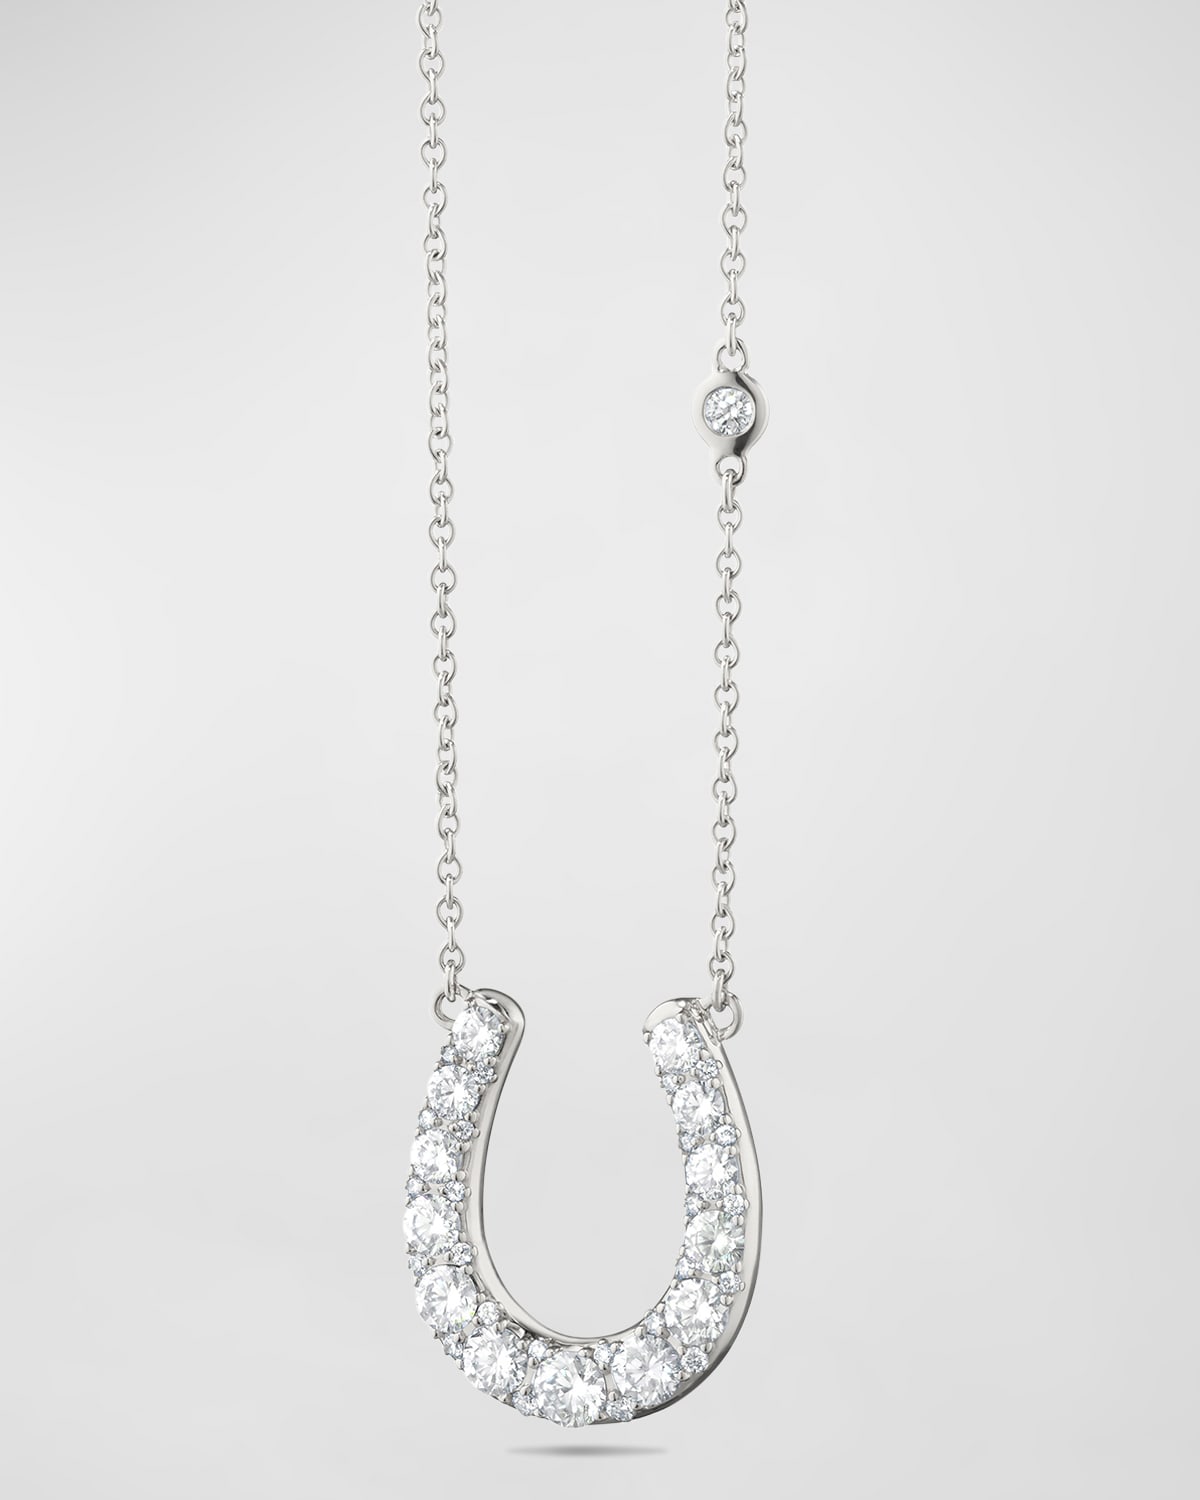 Sterling Silver Horseshoe Charm Necklace with White Sapphires